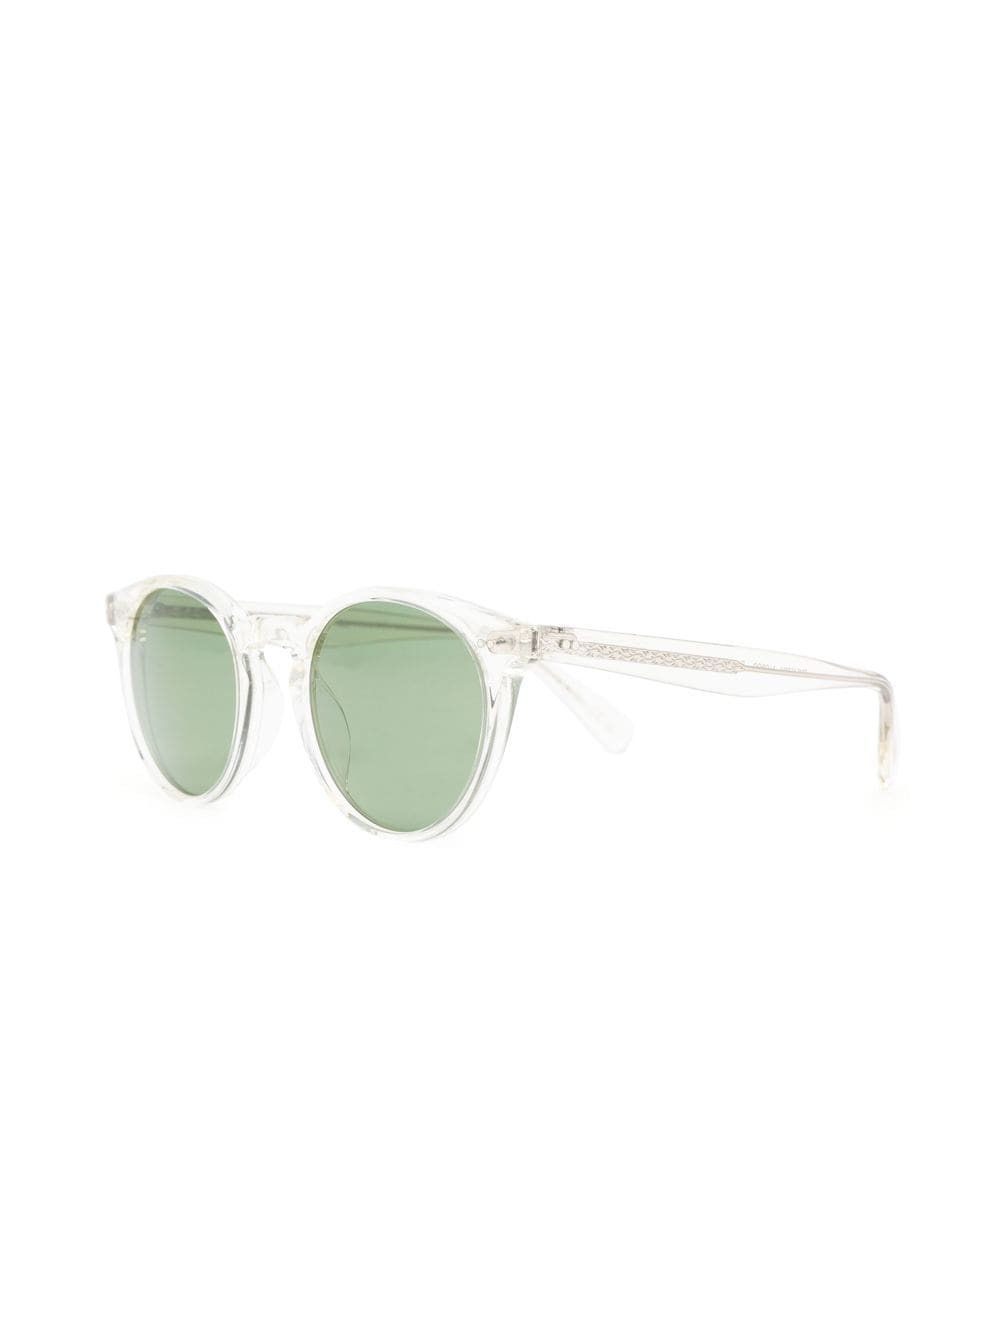 Image 2 of Oliver Peoples Romare round-frame sunglasses